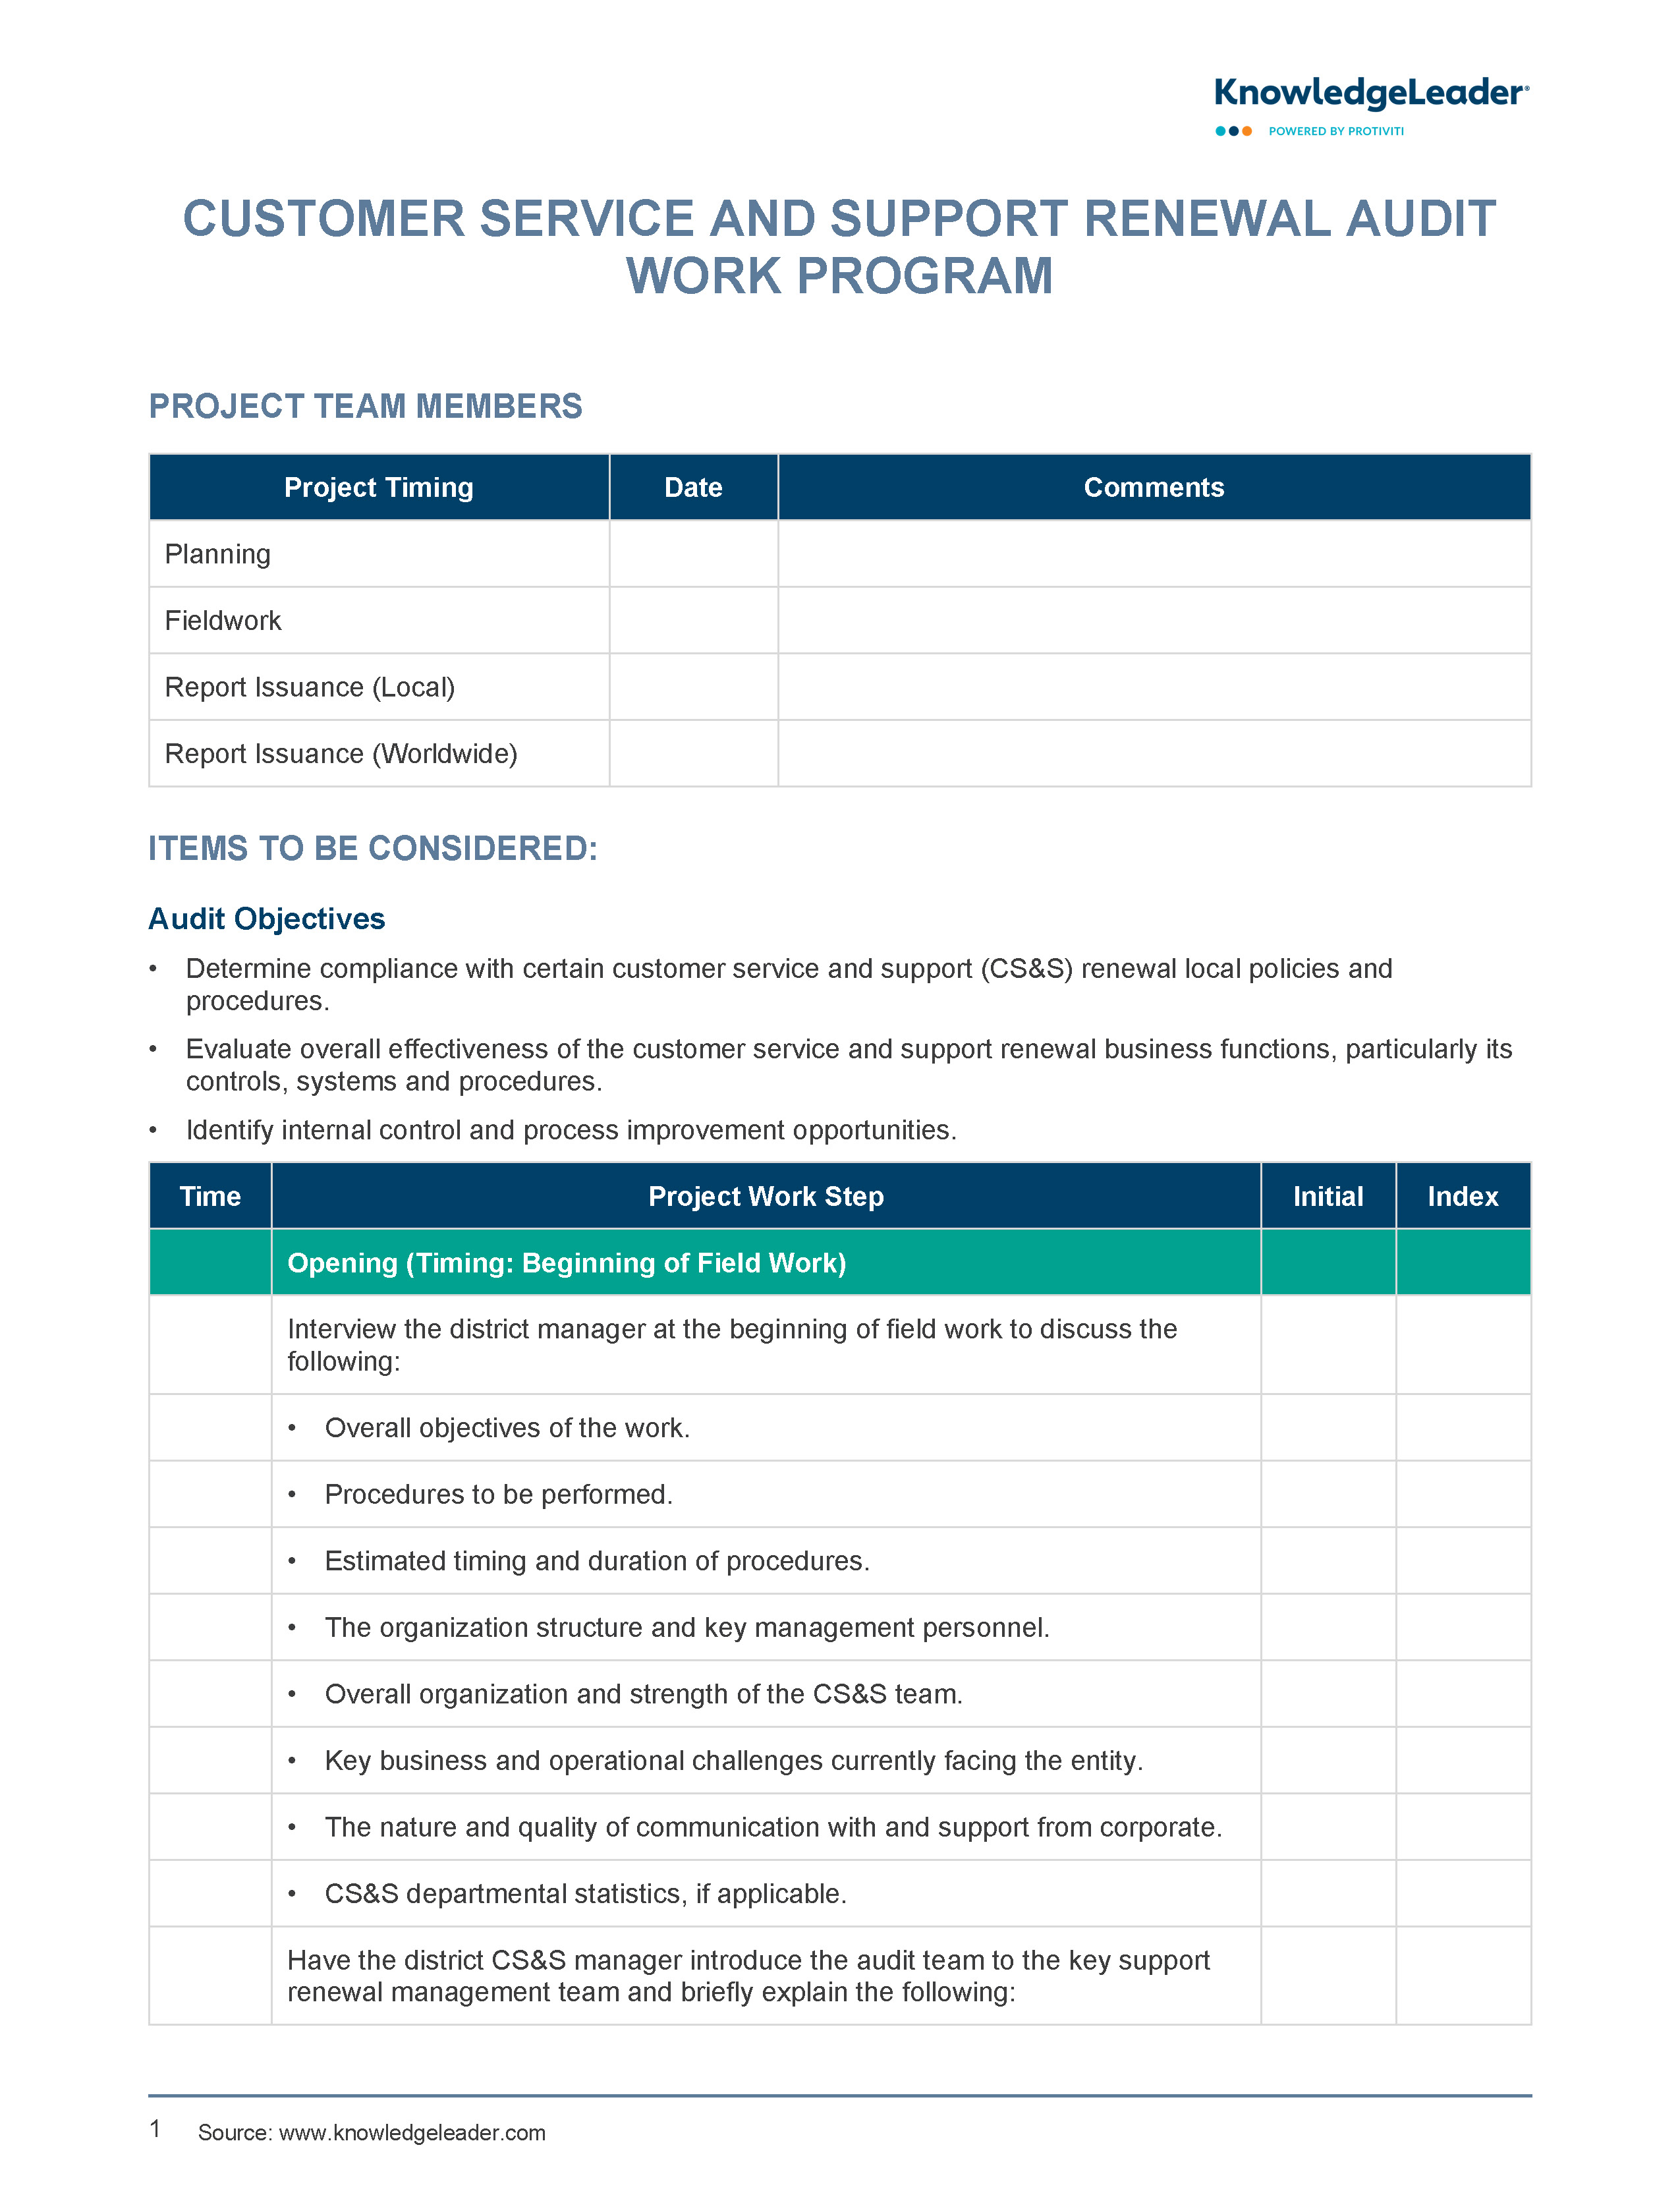 screenshot of the first page of Customer Service and Support Renewal Audit Work Program